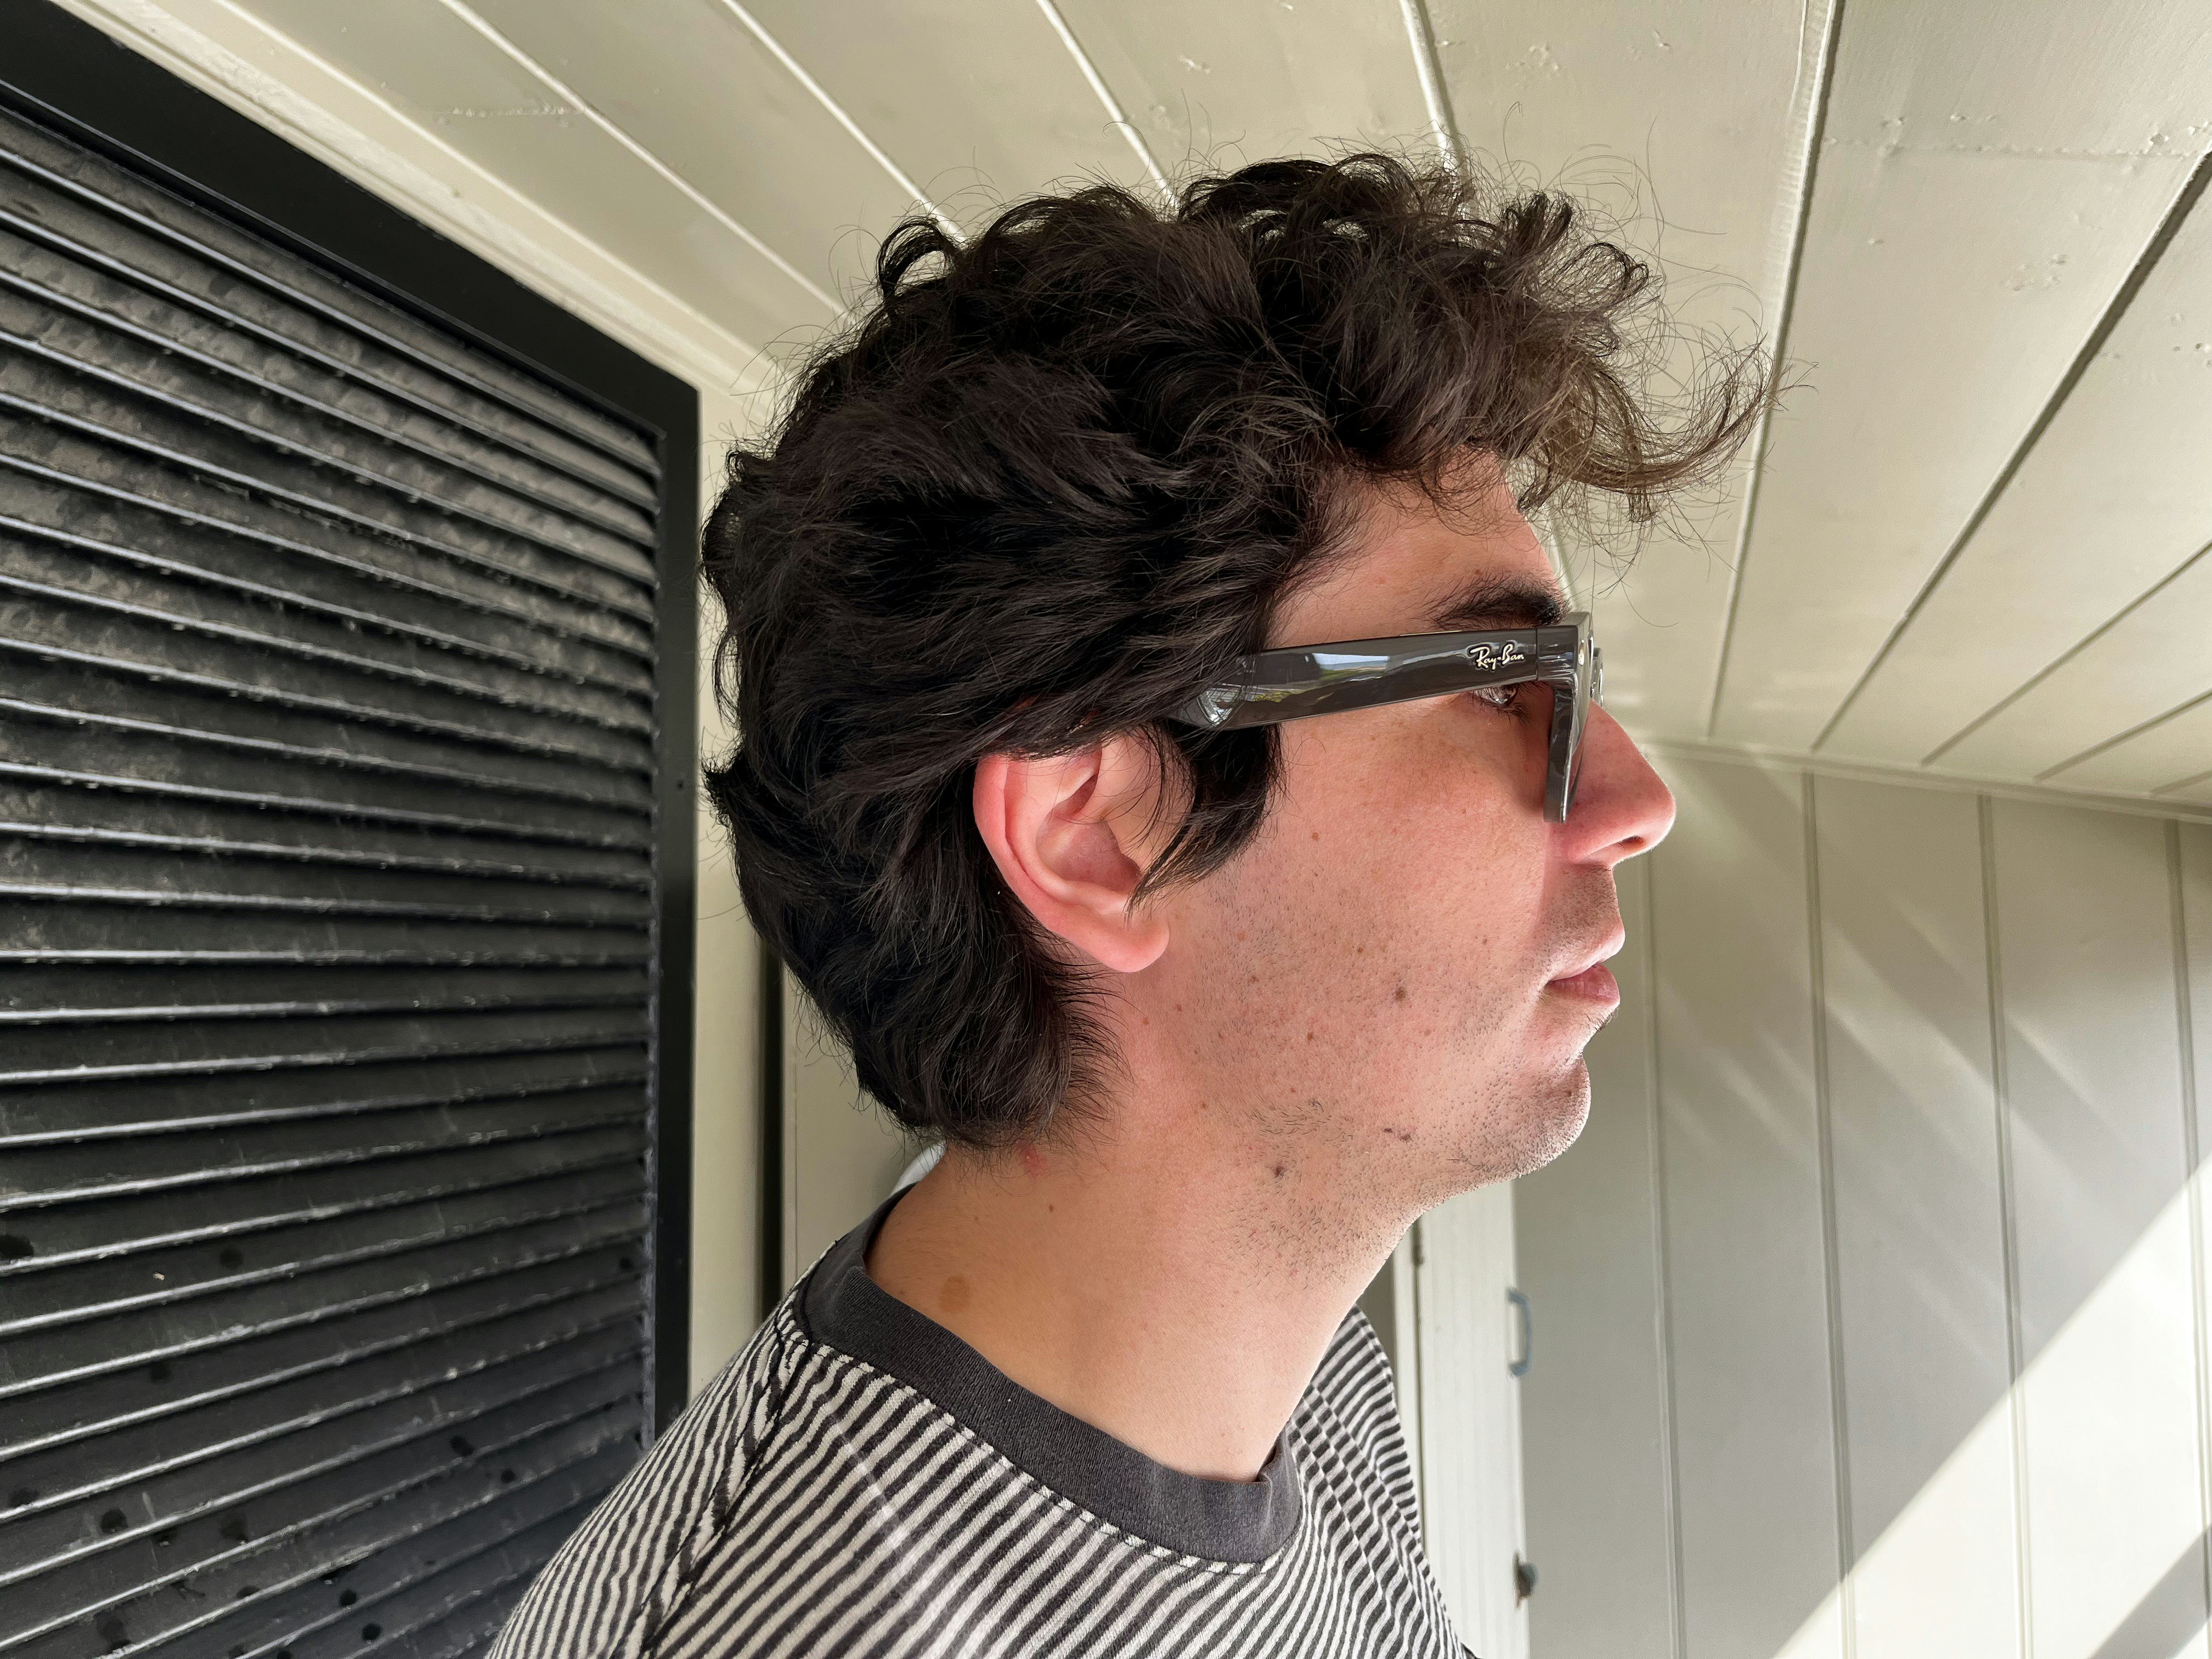 Ray-Ban Stories Smart Glasses Review (2022): Are They Worth It?